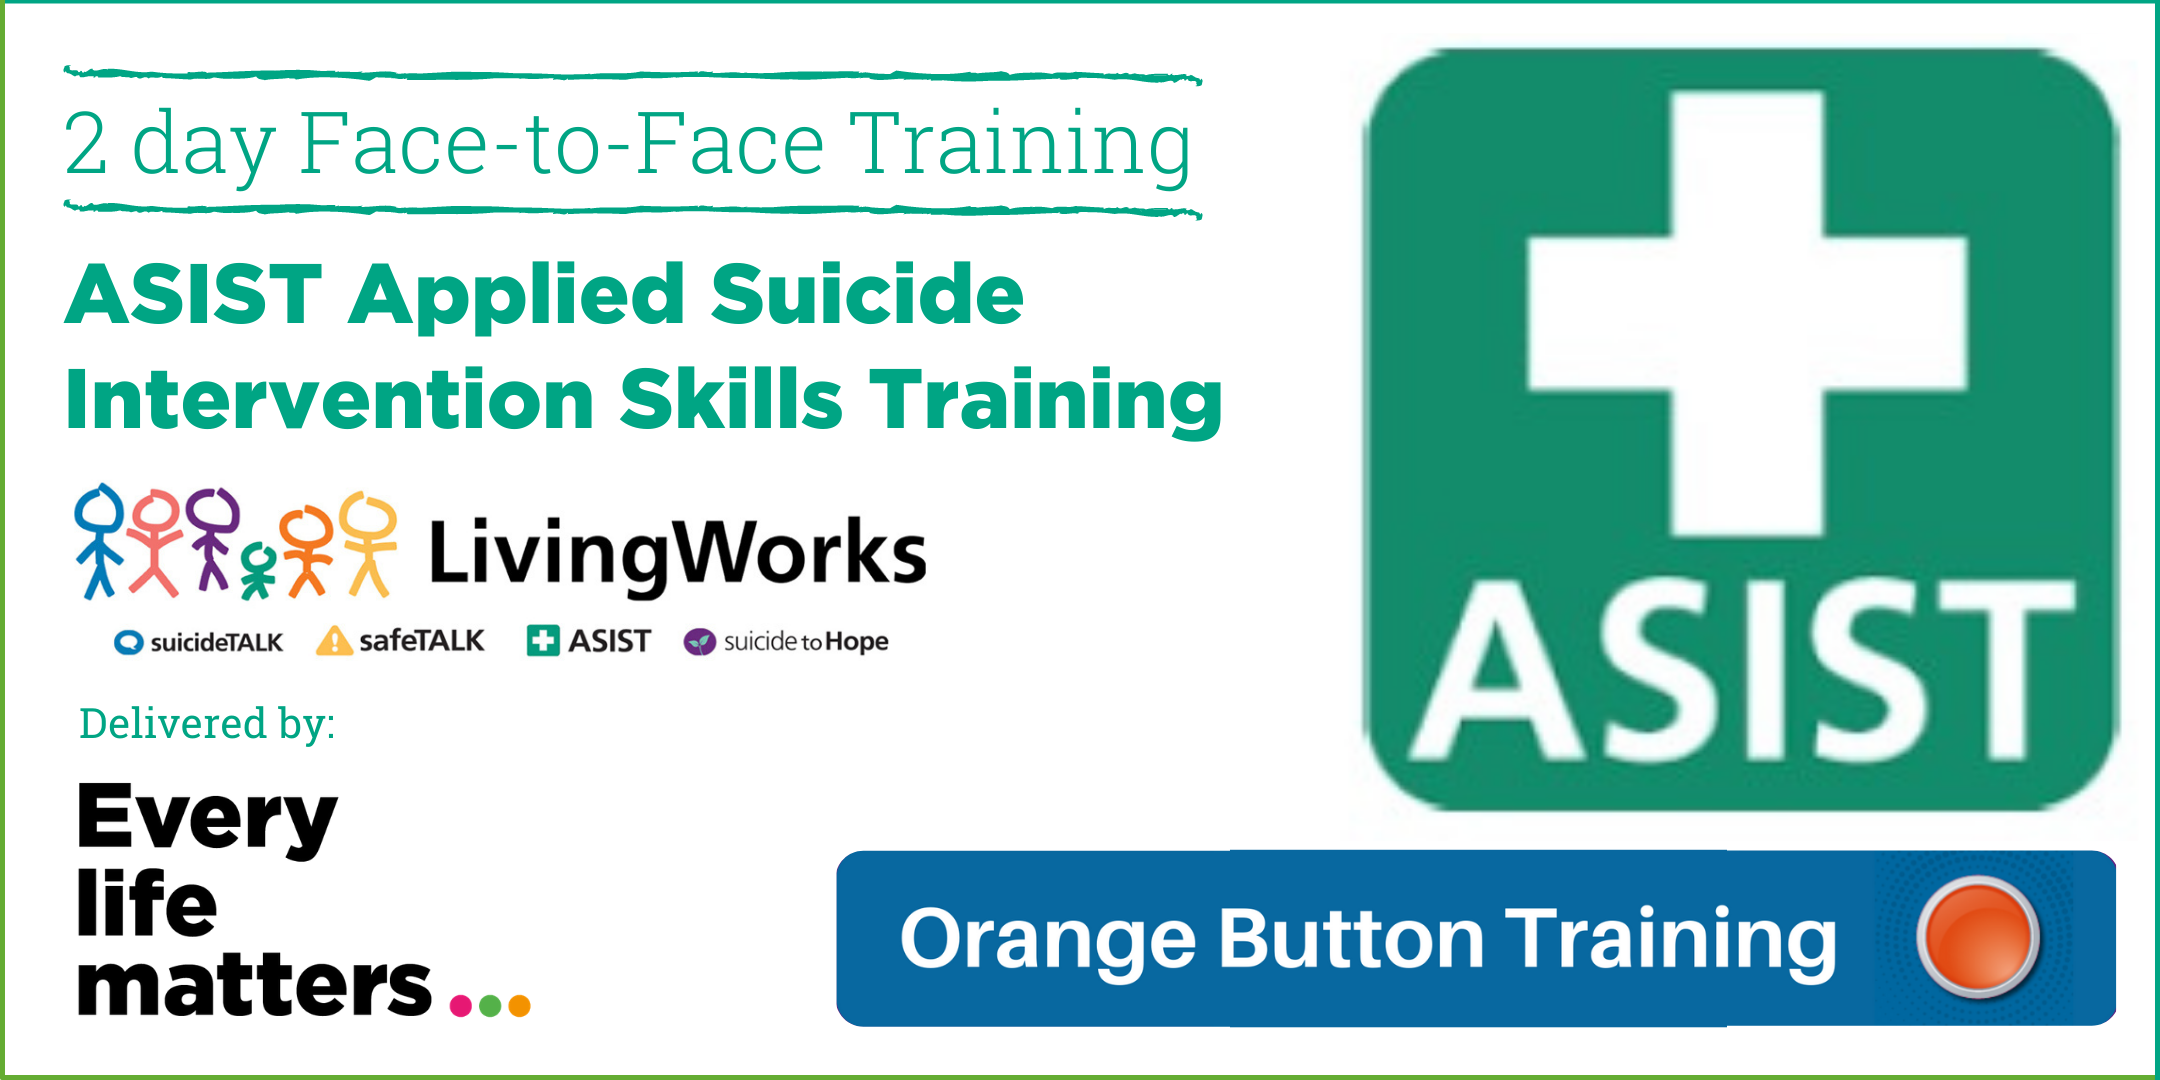 Suicide Awareness & Prevention Training Courses - Every Life Matters